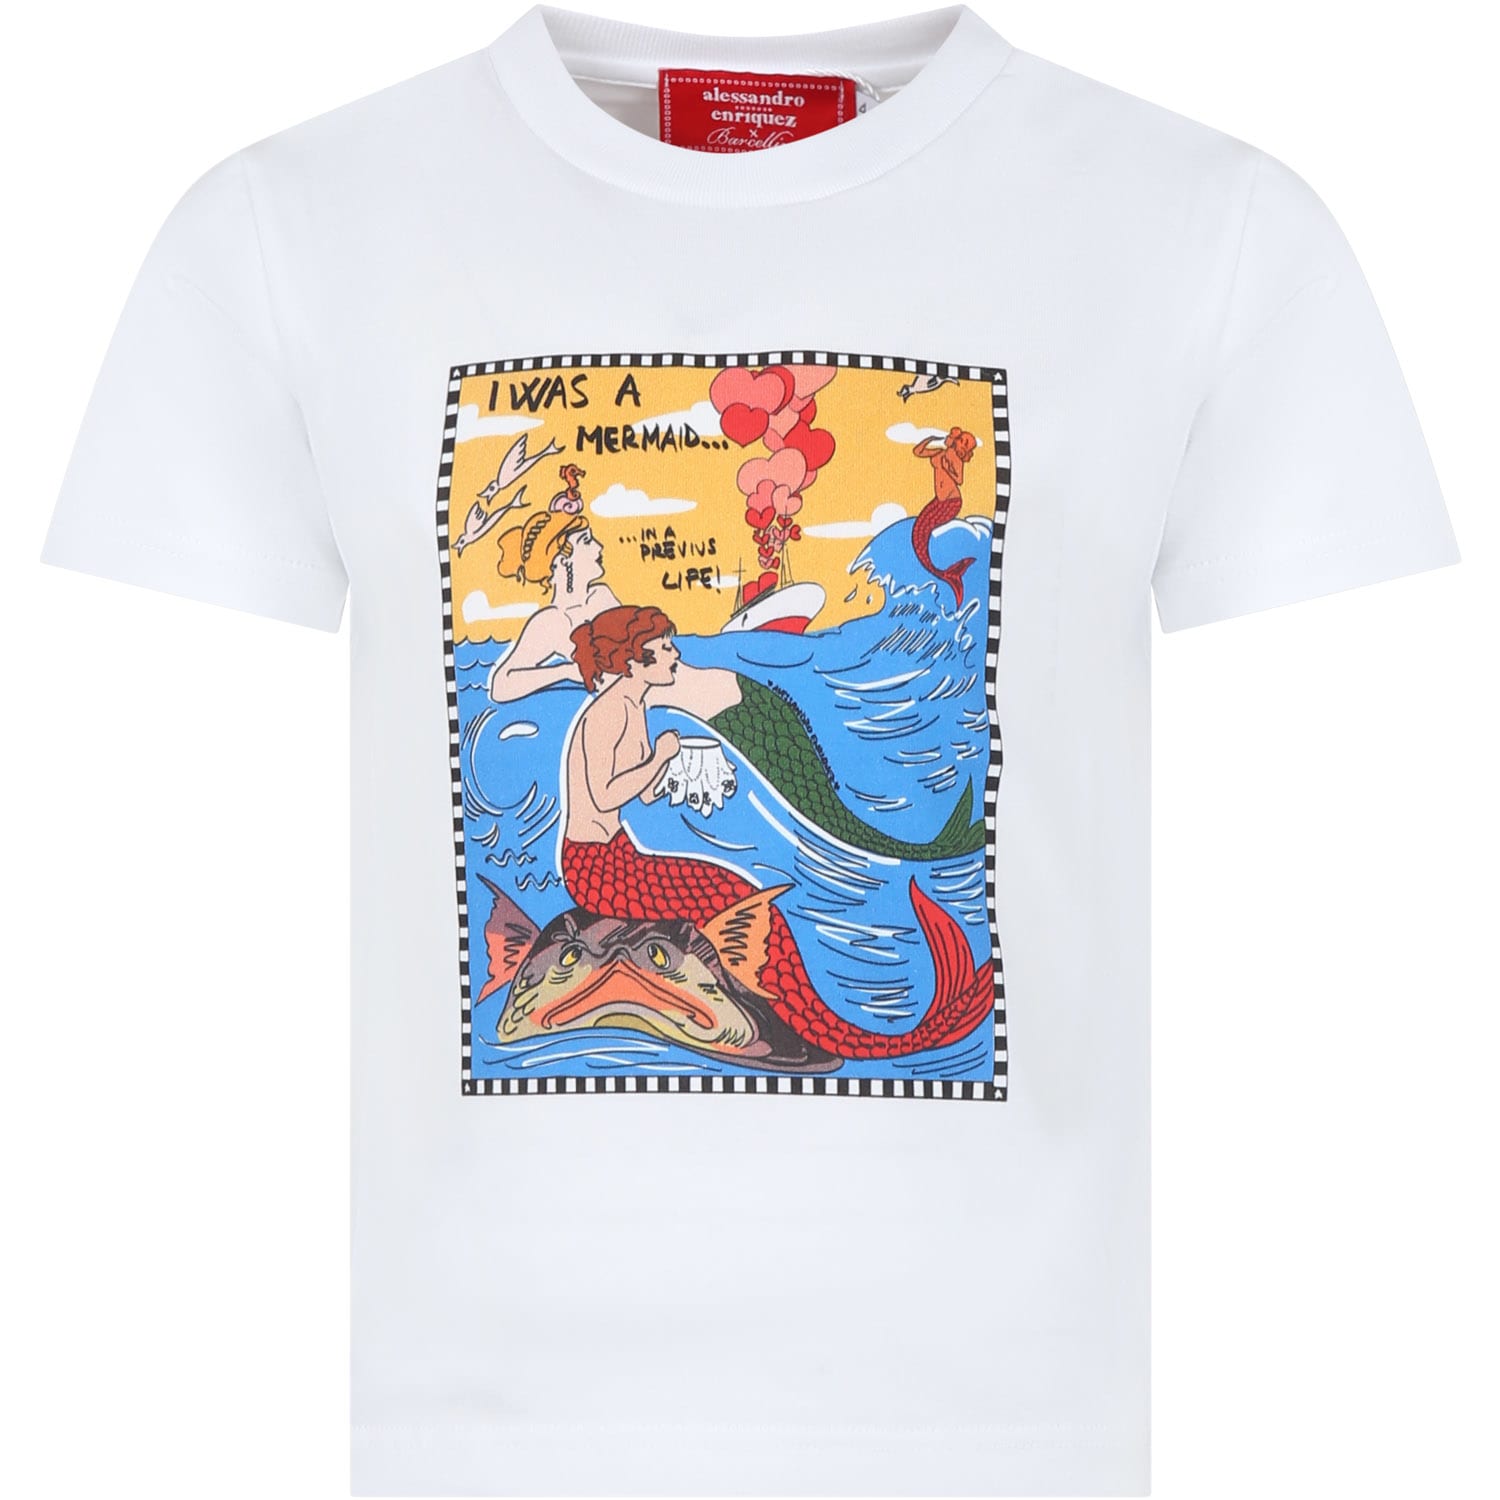 Alessandro Enriquez Kids' White T-shirt For Girl With Mermaid Print And Writing